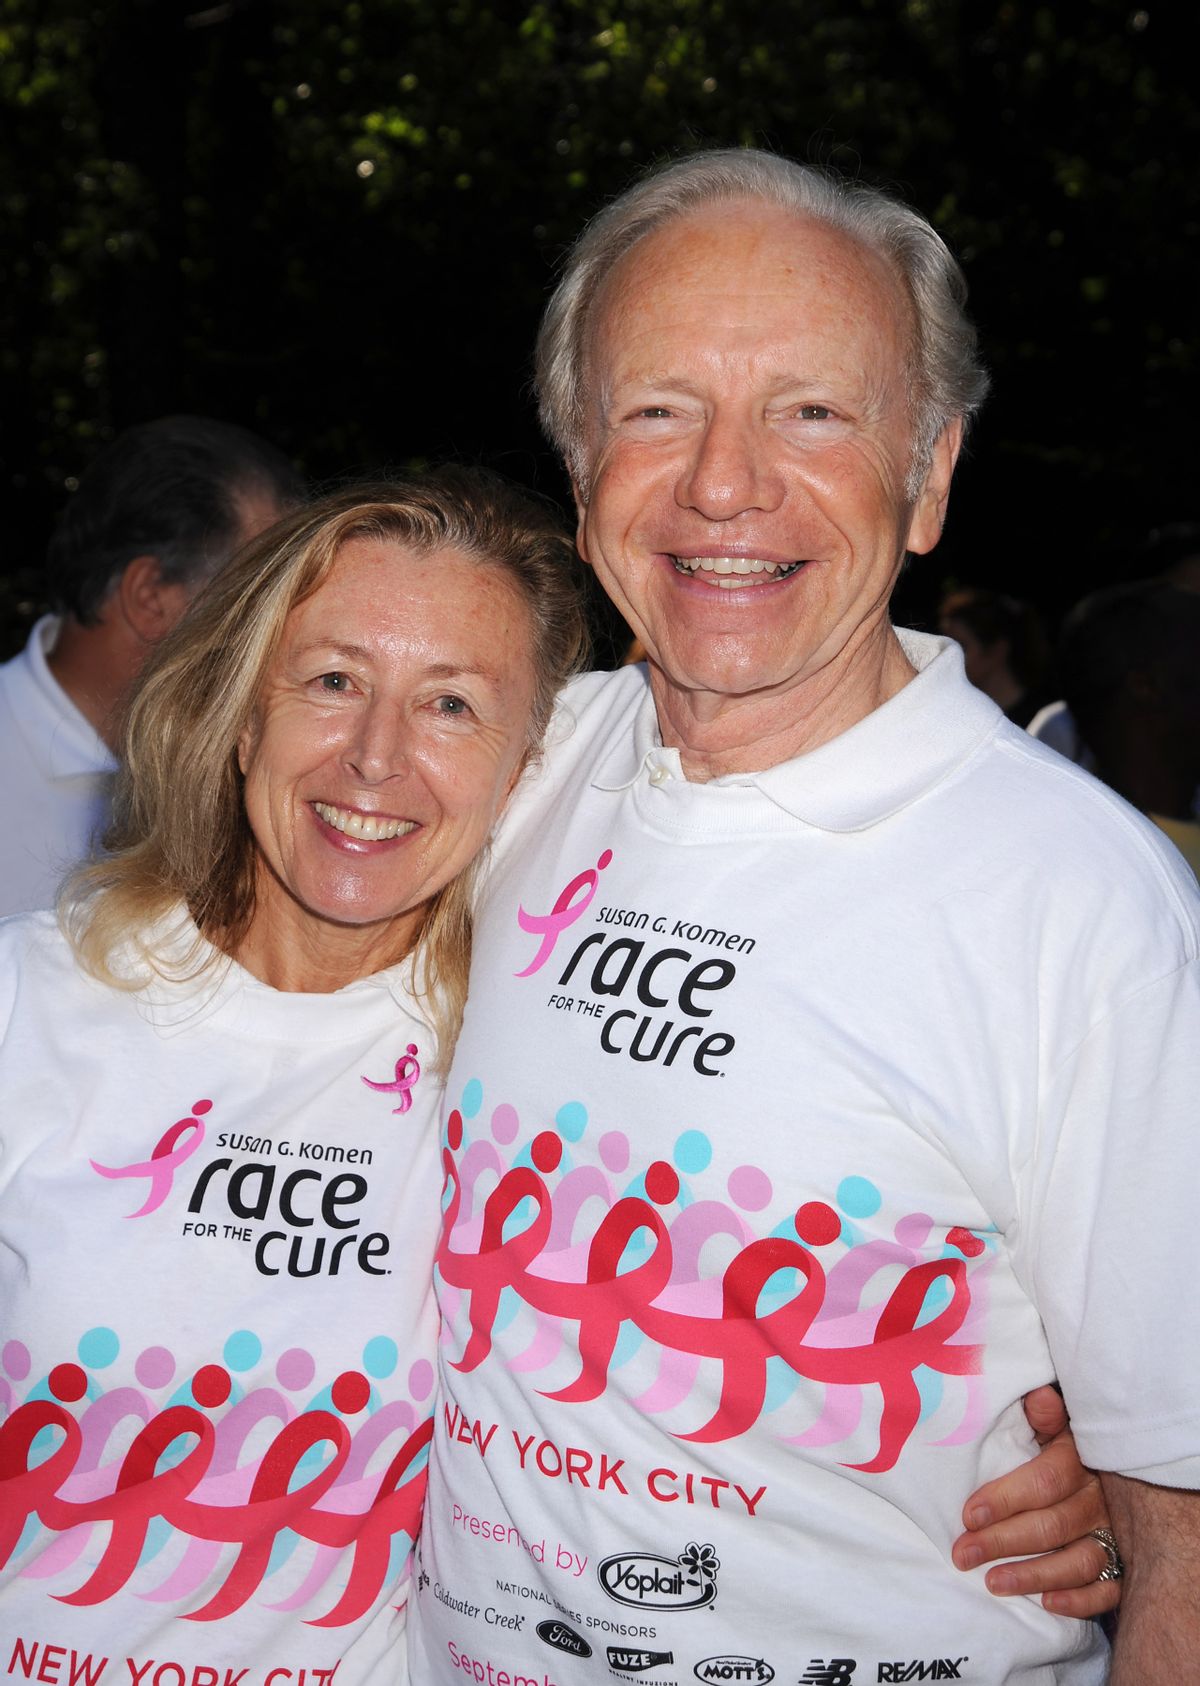 Joe Lieberman and wife Hadassah attend the Susan G. Komen New York City Race for the Cure 2009 at Central Park on September 13, 2009 in New York City, Ca (AP Photo / Tammie Arroyo)    (Associated Press)